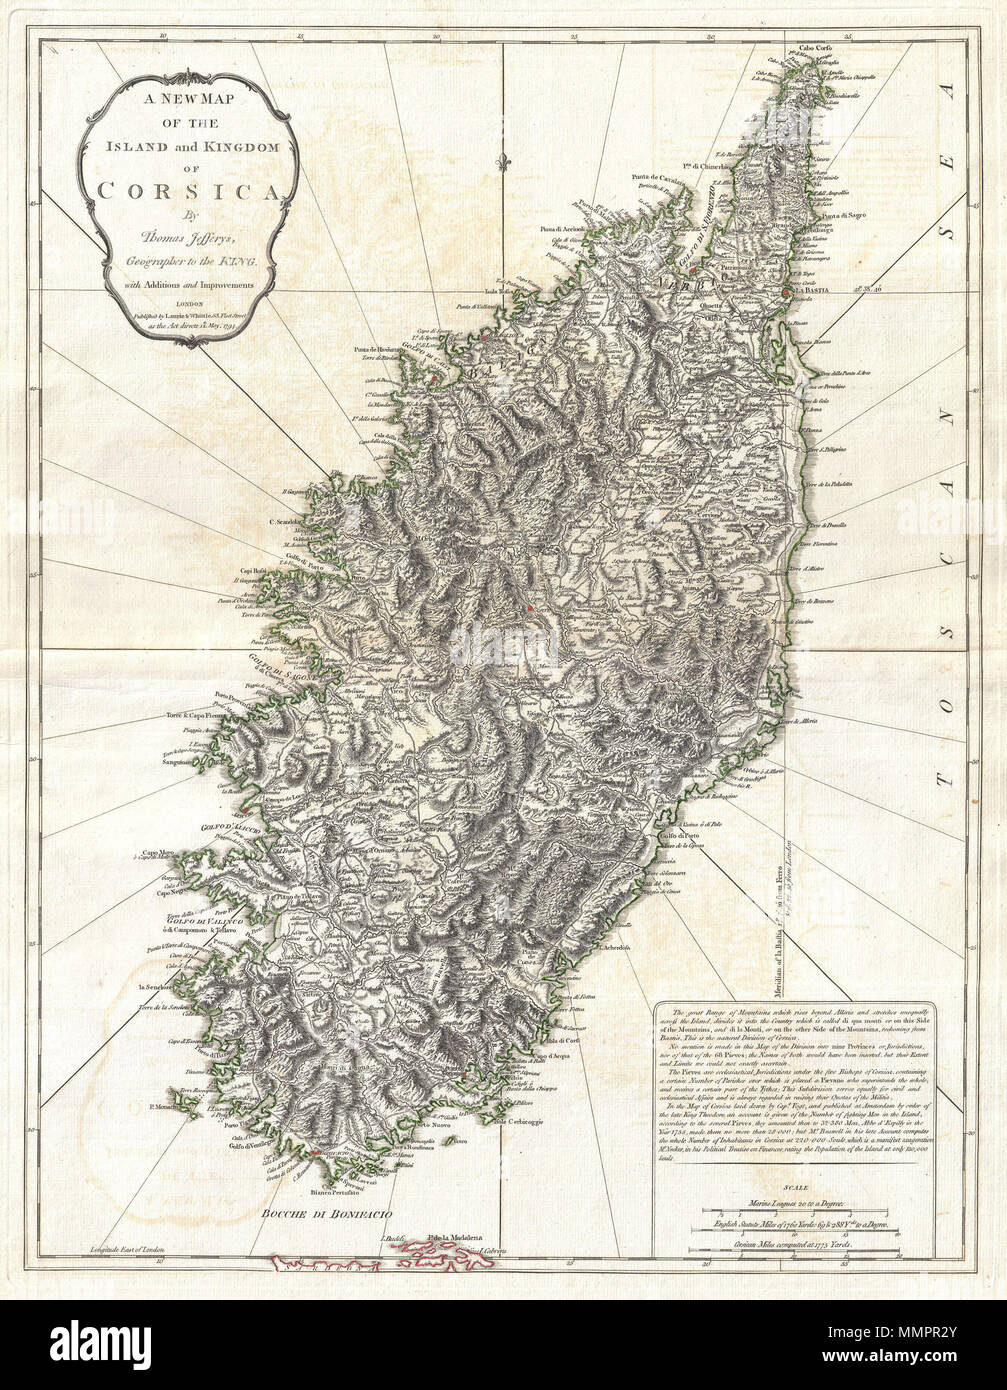 .  English: An extraordinary 1794 map of the Island and Kingdom of Corsica. Covers the entire island in extraordinary detail offering both topographical and political information. With its unique blend of dramatic mountains and stunning pristine beaches, Corsica is considered to be one of the world's most beautiful places. A note in the lower right hand quadrant discusses the geography and population of the island. Prepared by Thomas Jefferys and published by Laurie & Whittle in Kitchin's 1794 General Atlas .  A New Map of the Island and Kingdom of Corsica.. 1794 (dated). 1794 Jeffreys Map of  Stock Photo